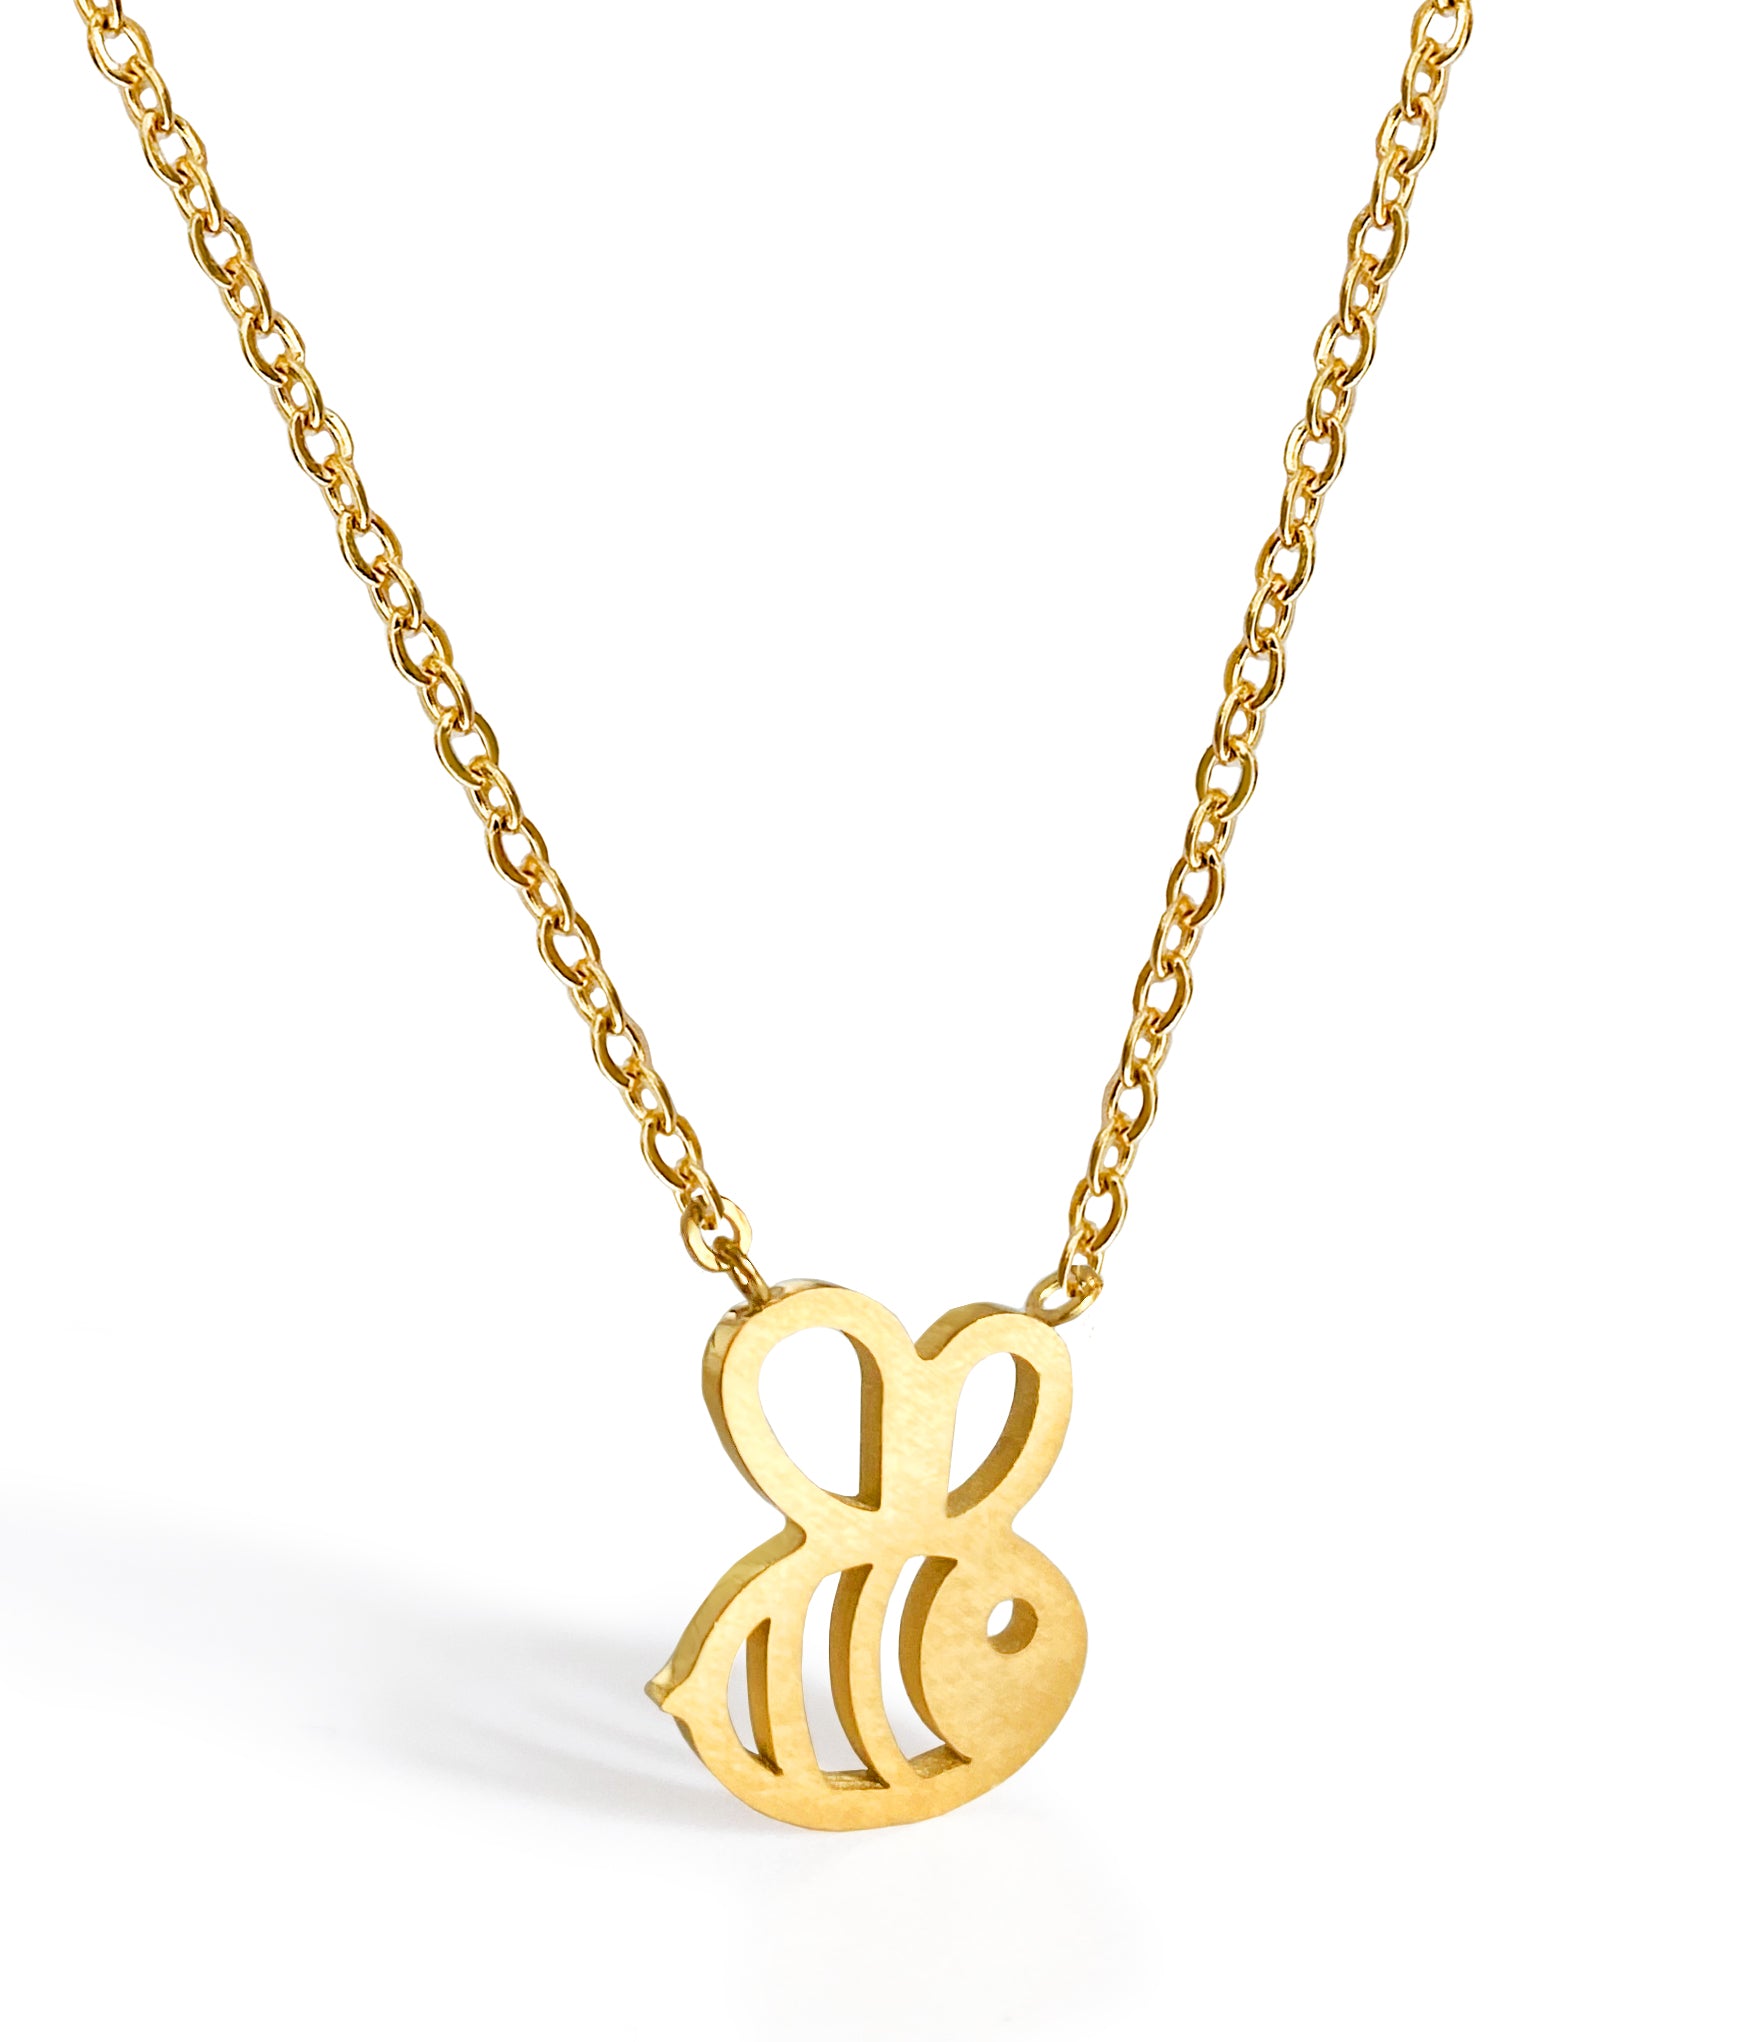 Bumble Bee Victoria Necklace